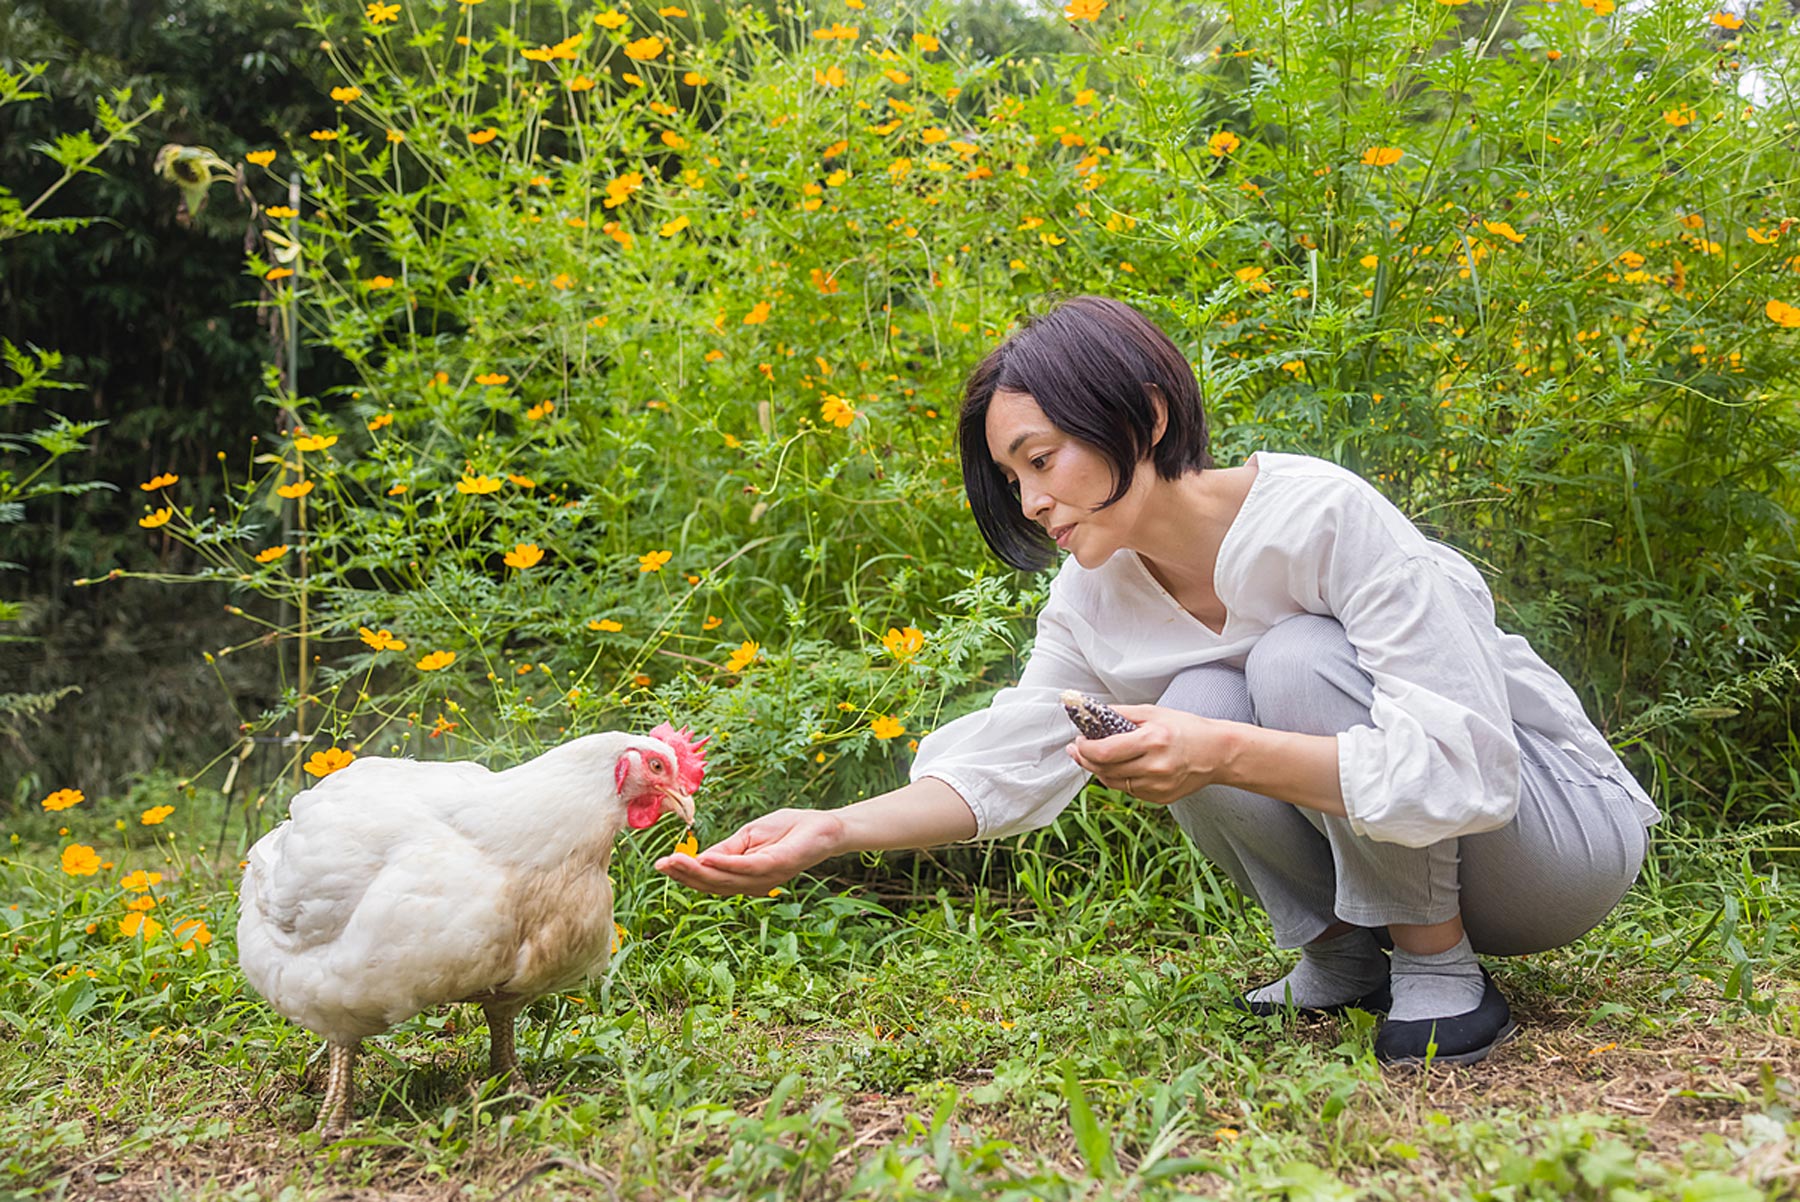 Ms. Okada with a chicken rescued from a broiler farm. The chicken was rescued by the Animal Rights Center.